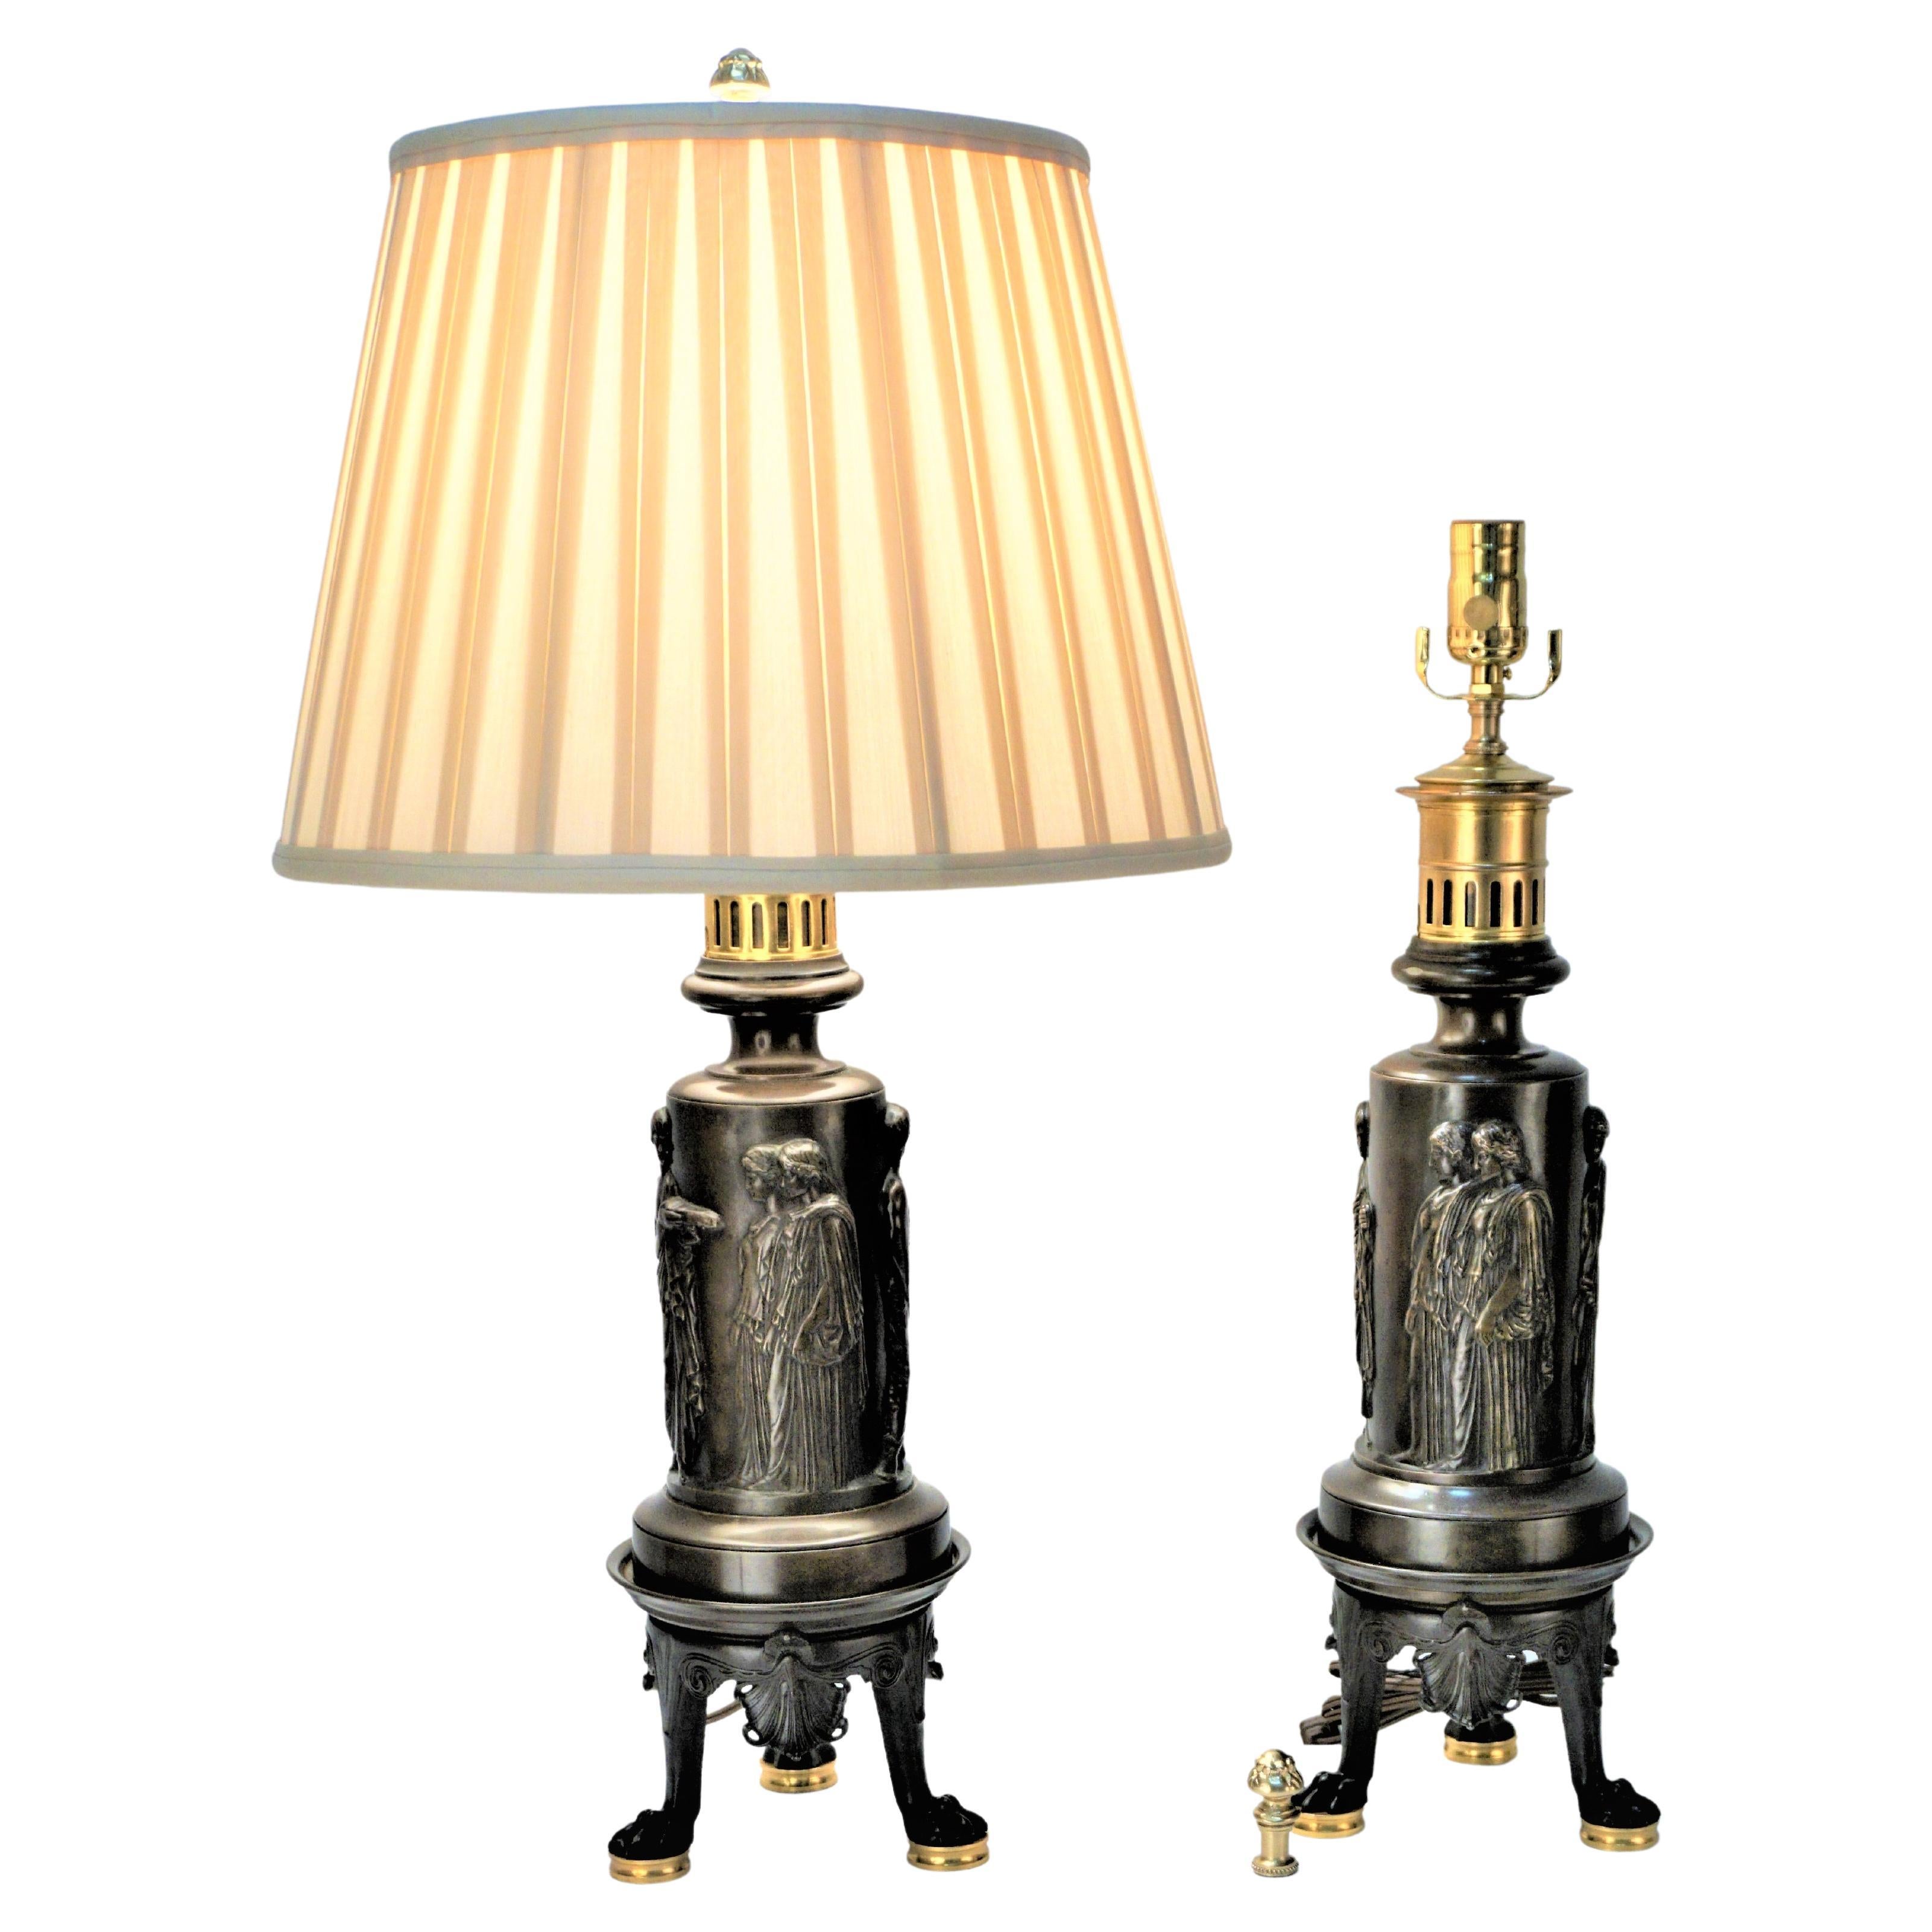 F. Barbedienne Pair of 19th Century Electrified Oil Lamps